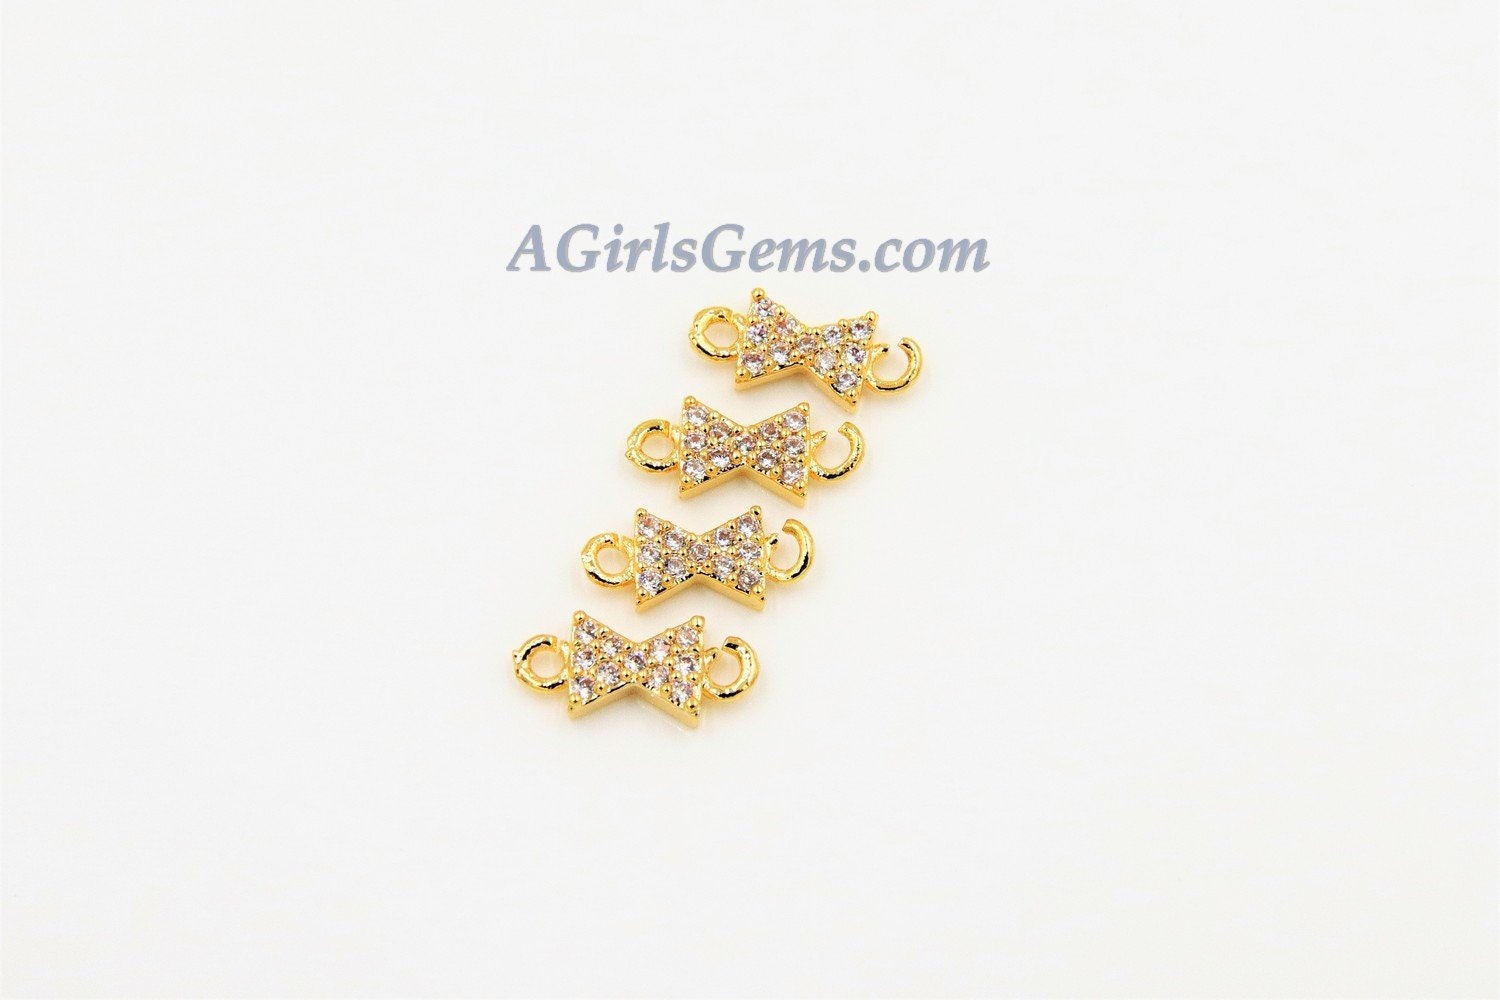 CZ Micro Pave Bow Tie Connector #26, Tiny Hourglass Charm 18 k Gold Plated 4 x 10 mm Ribbon Connector, Tiny CZ Charms for Jewelry Making